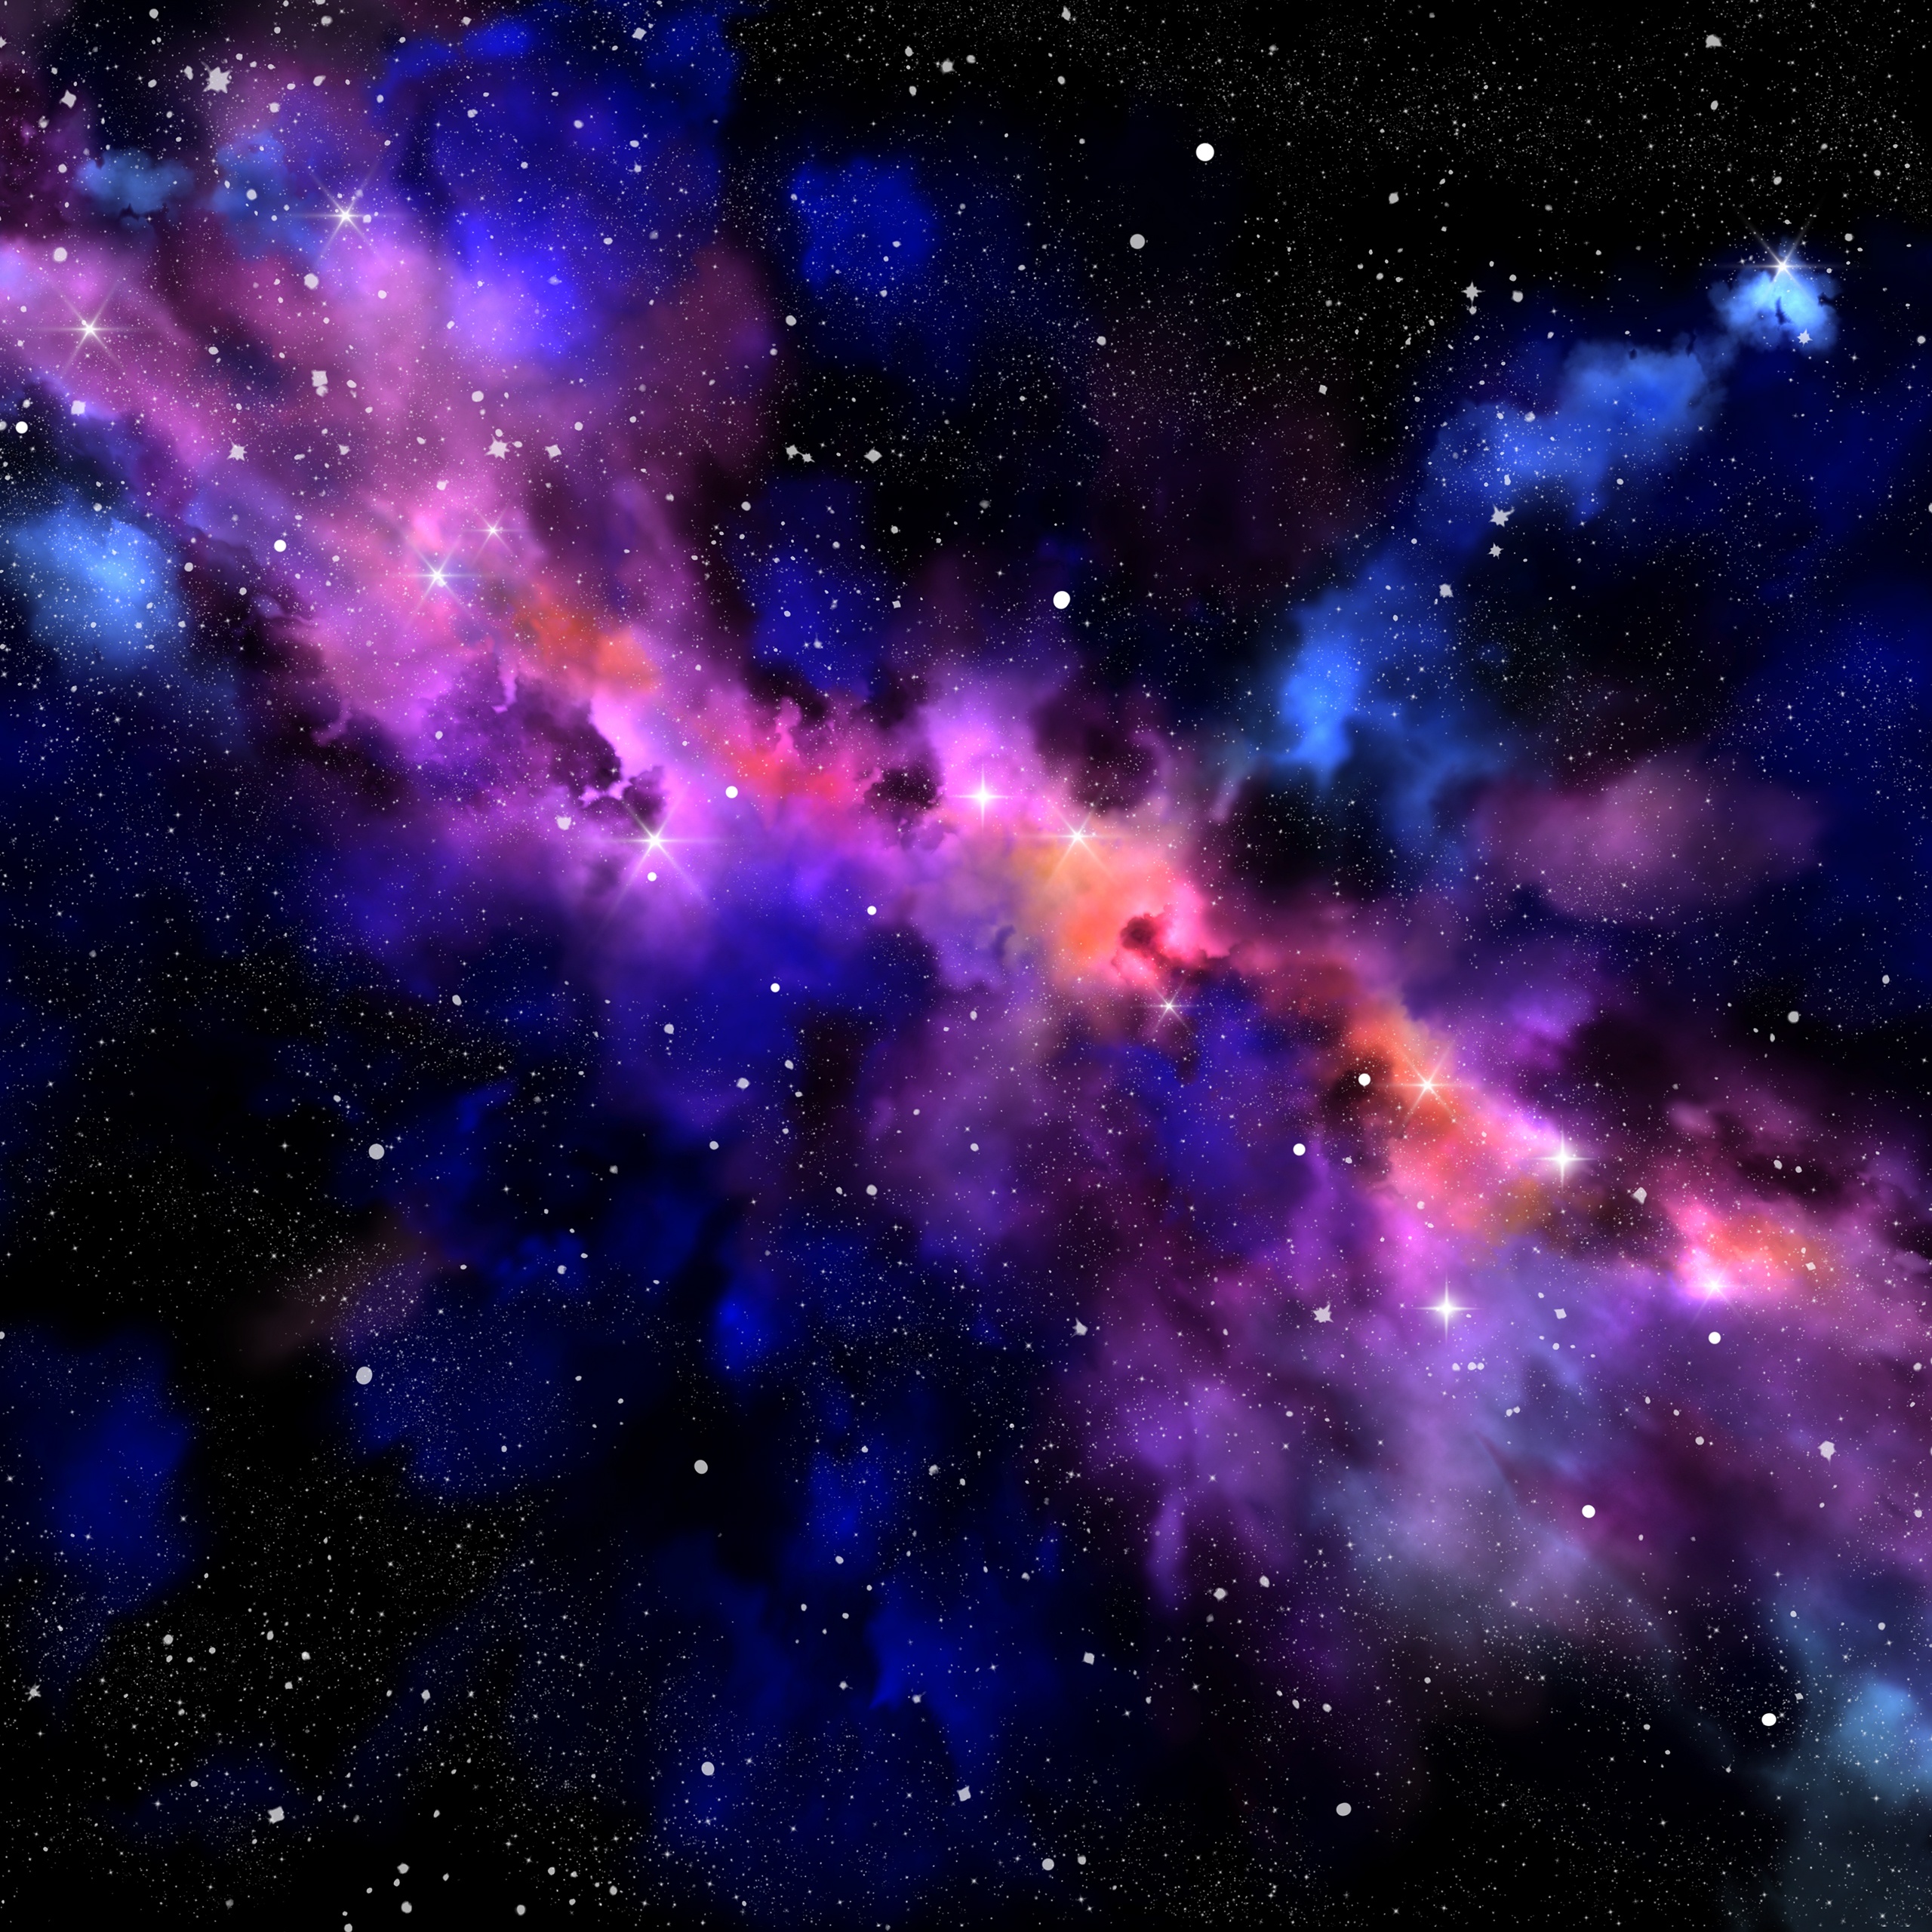 https://4kwallpapers.com/images/wallpapers/galaxy-milky-way-stars-deep-space-colorful-astronomy-nebula-2560x2560-5373.jpg